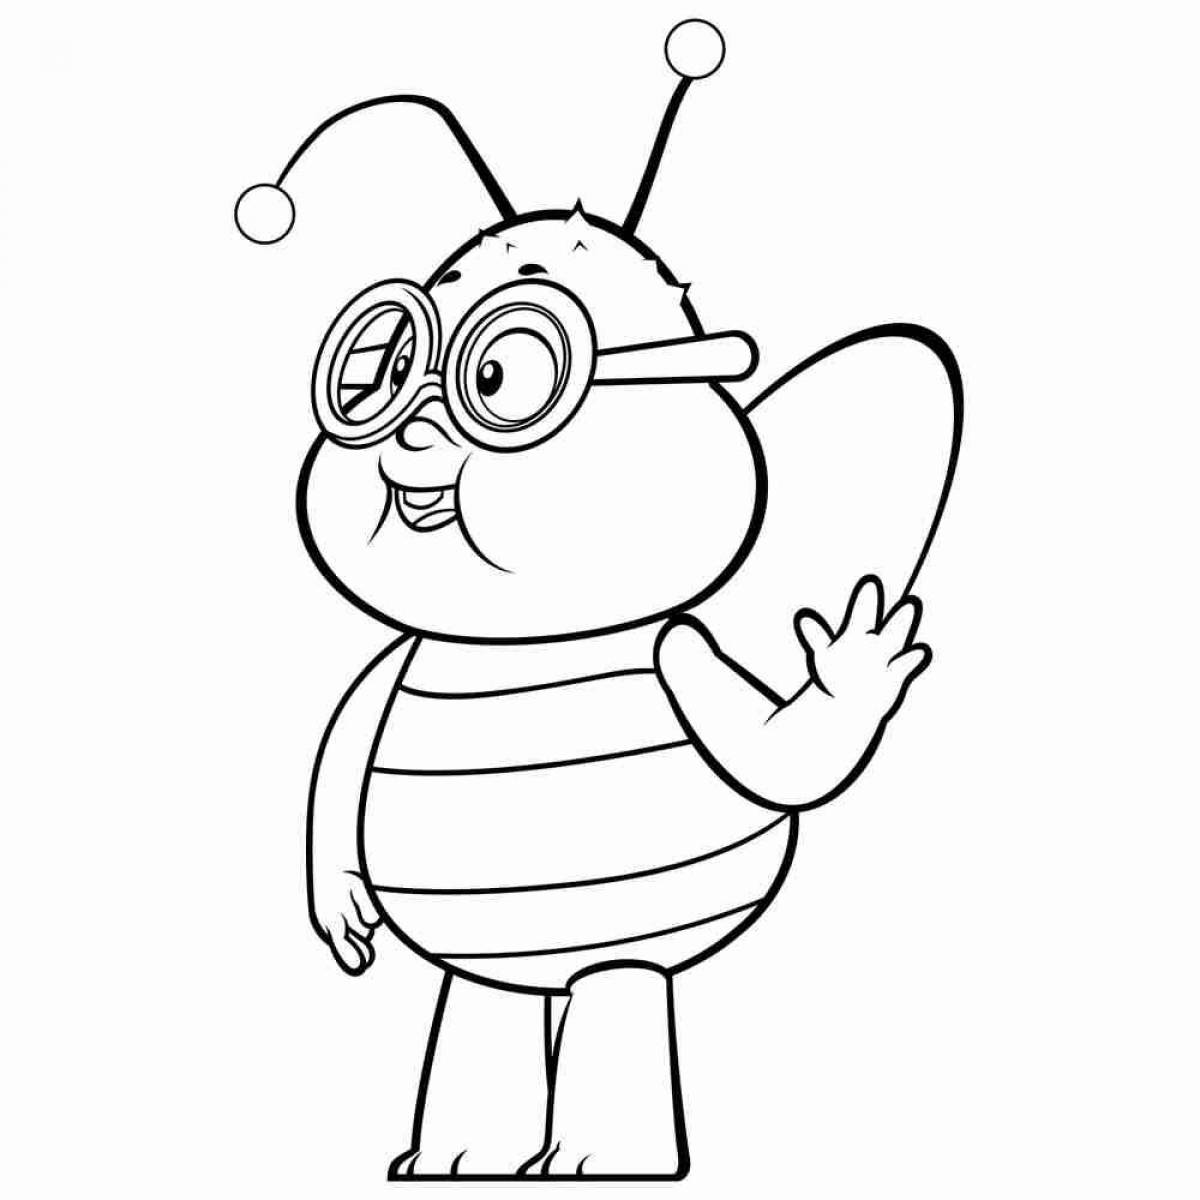 Glitter bee coloring page